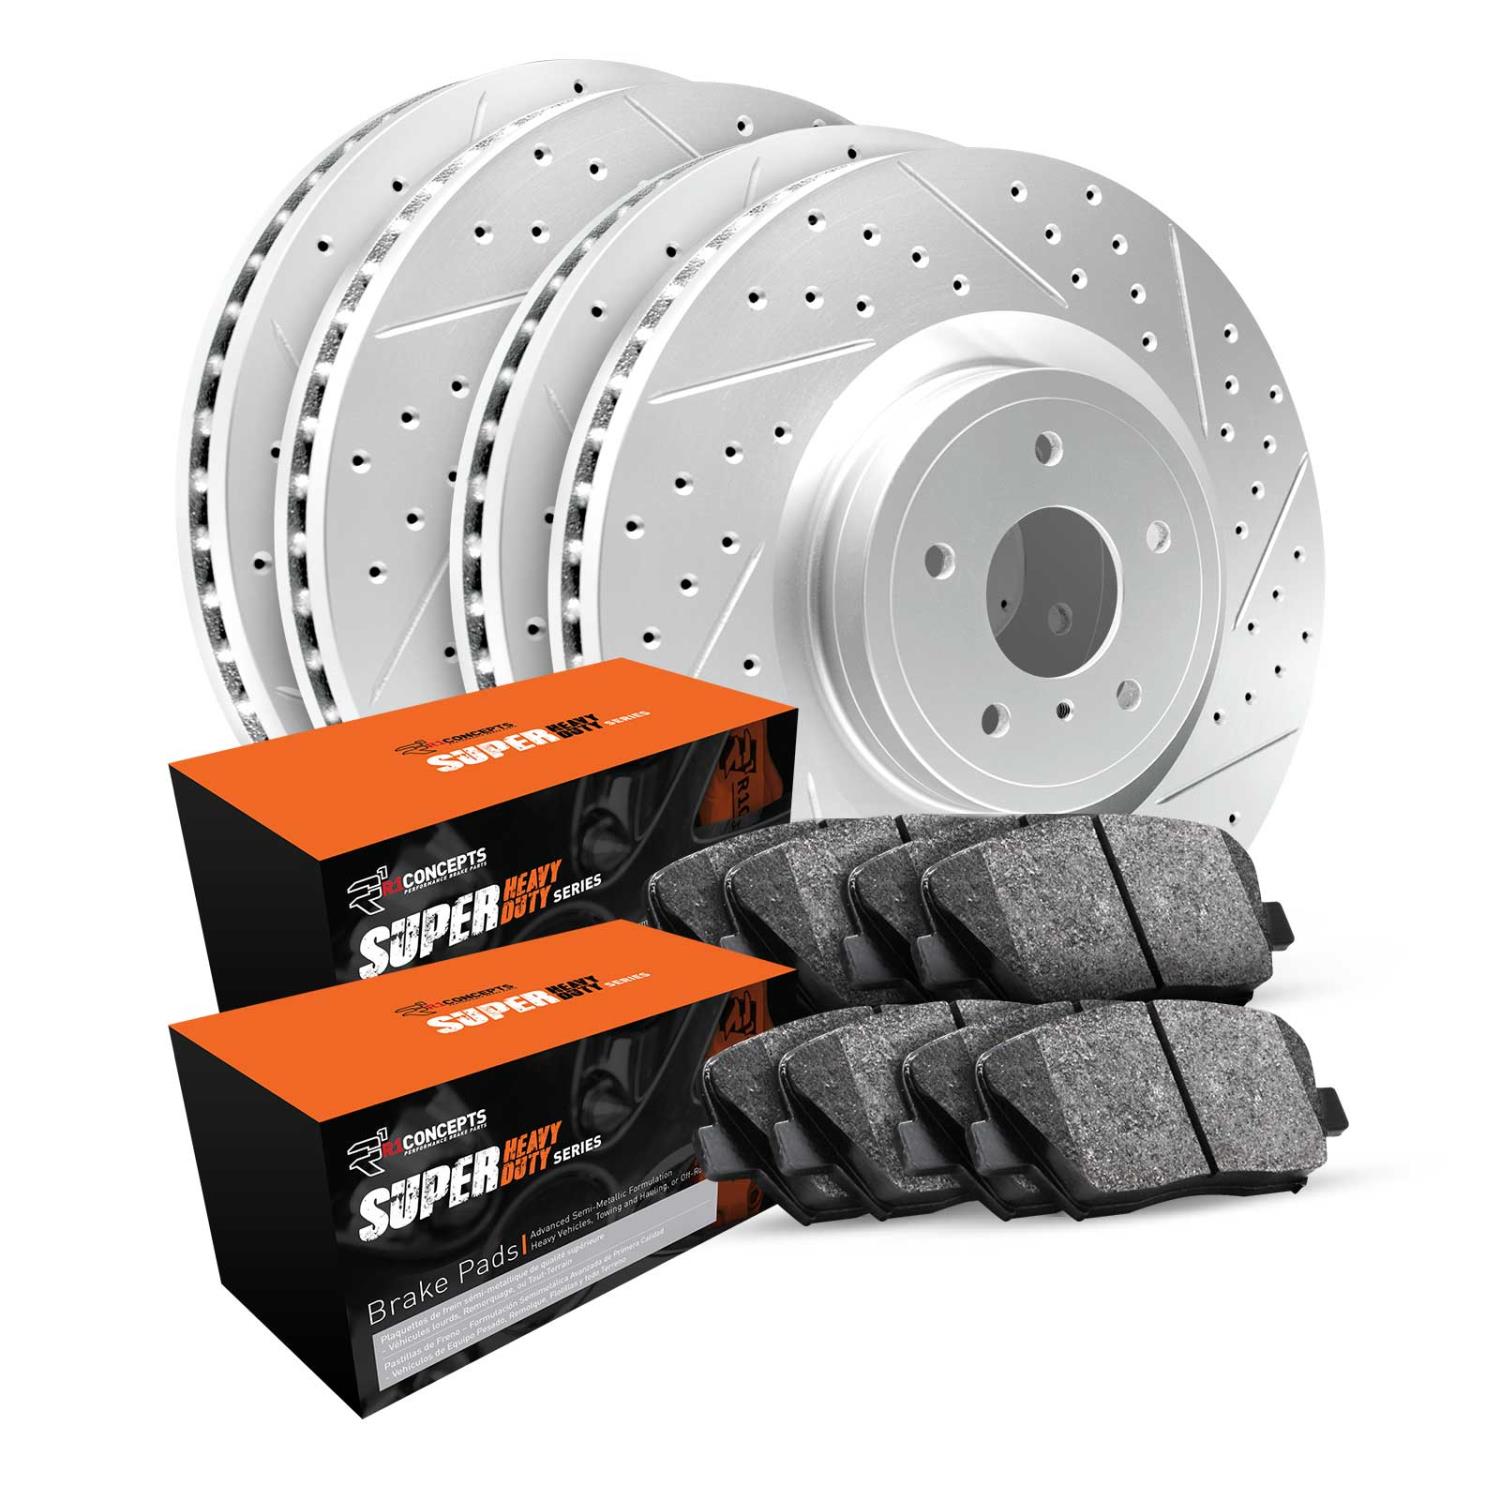 GEO-Carbon Drilled & Slotted Brake Rotor & Drum Set w/Super-Duty Pads & Shoes, 2005-2010 Fits Multiple Makes/Models